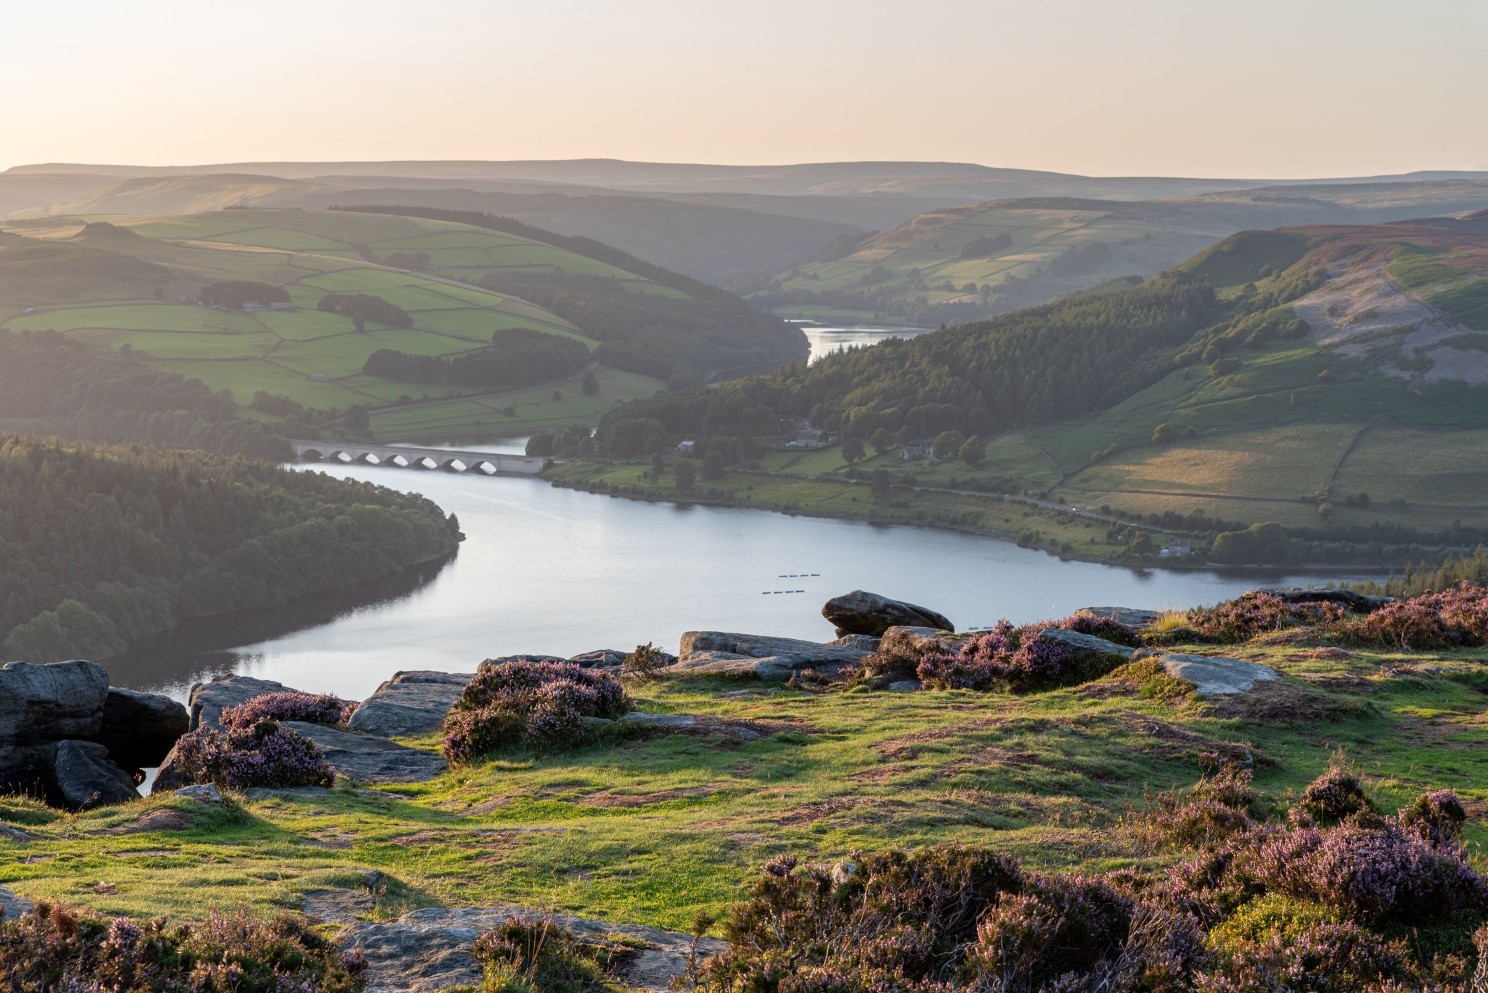 A scenic view of the Ashopton Viaduct, Ladybower Reservoir, and Crook Hill in the Peak District